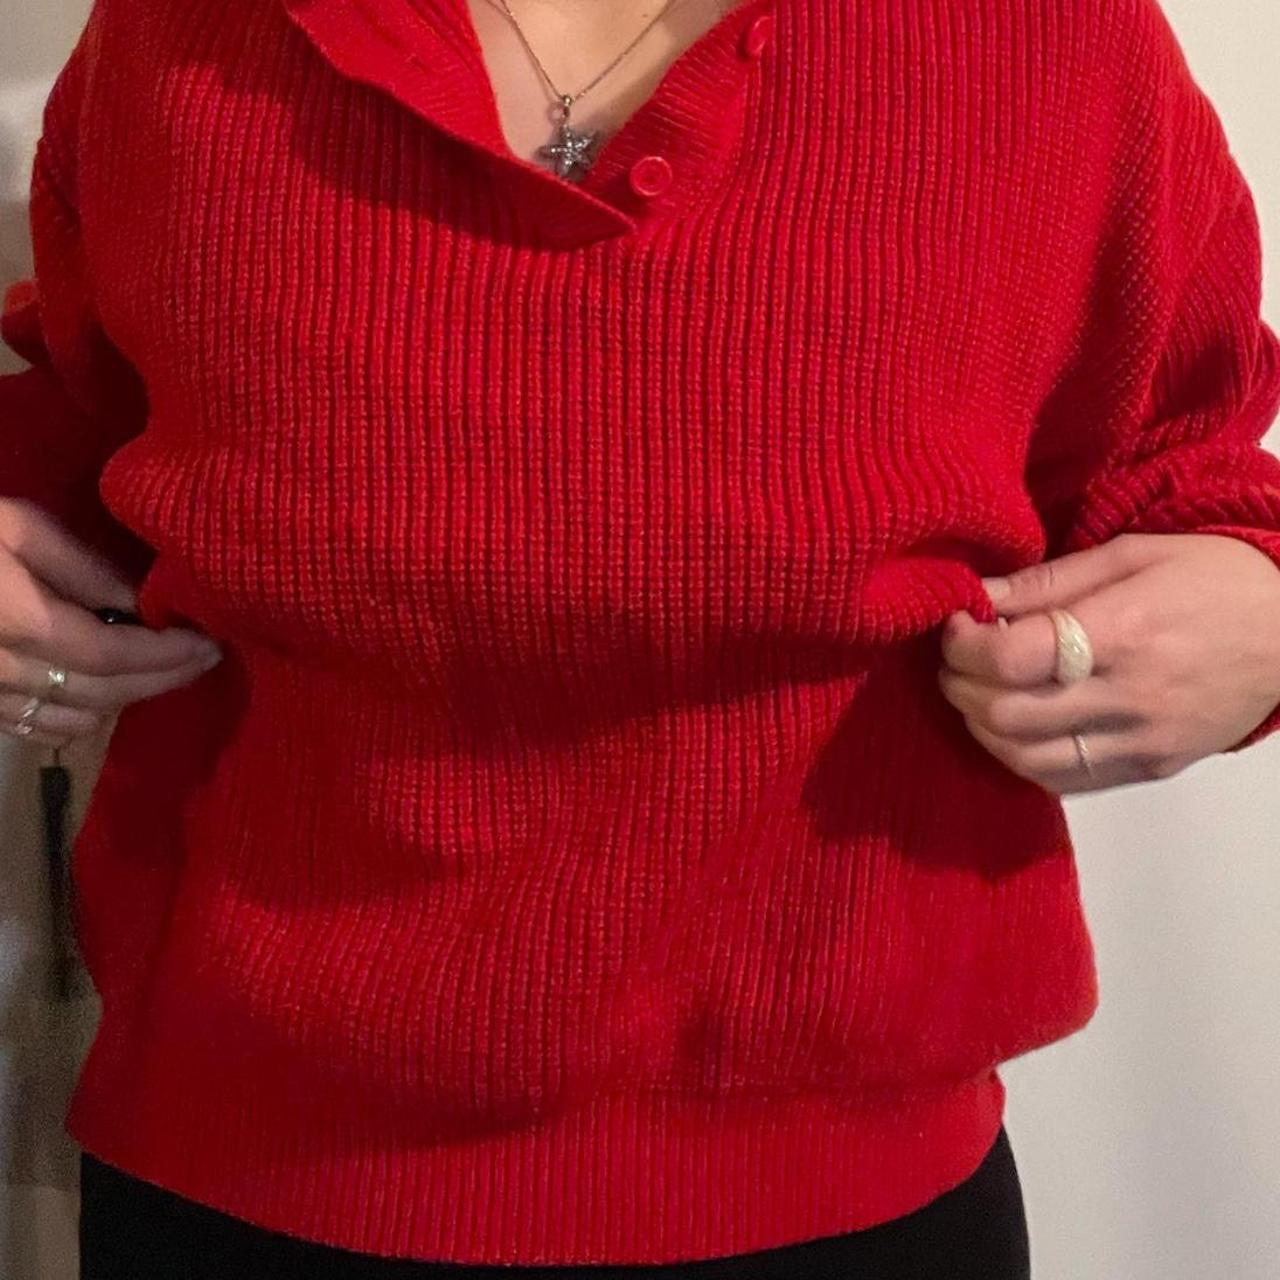 Product Image 2 - RED THICK SWEATER!! Can be